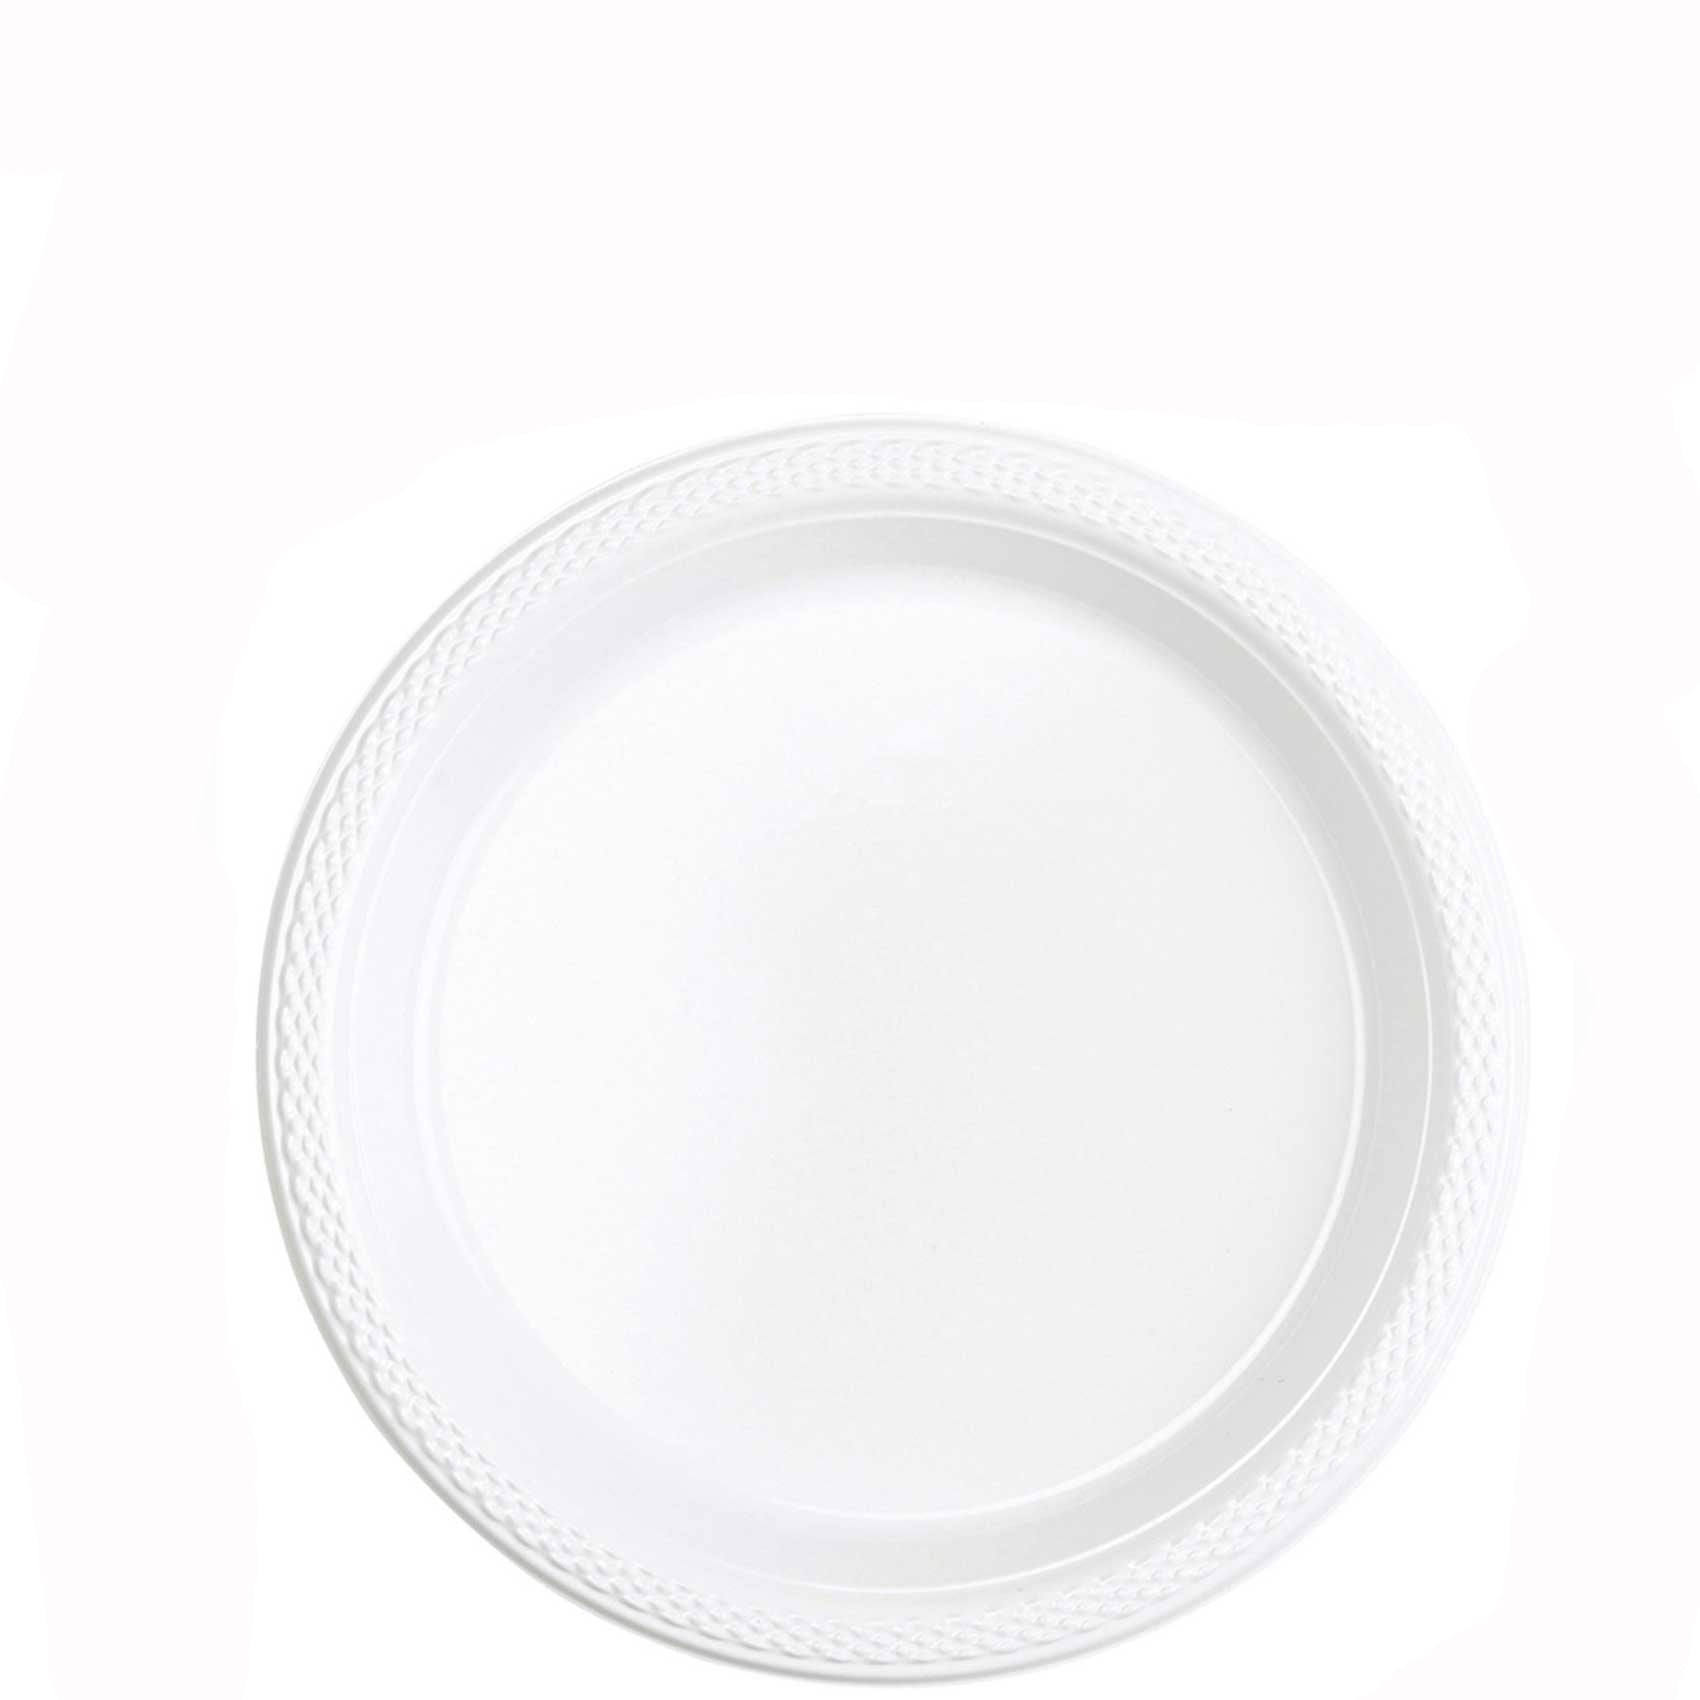 White Plastic Plates 7in, 20pcs Solid Tableware - Party Centre